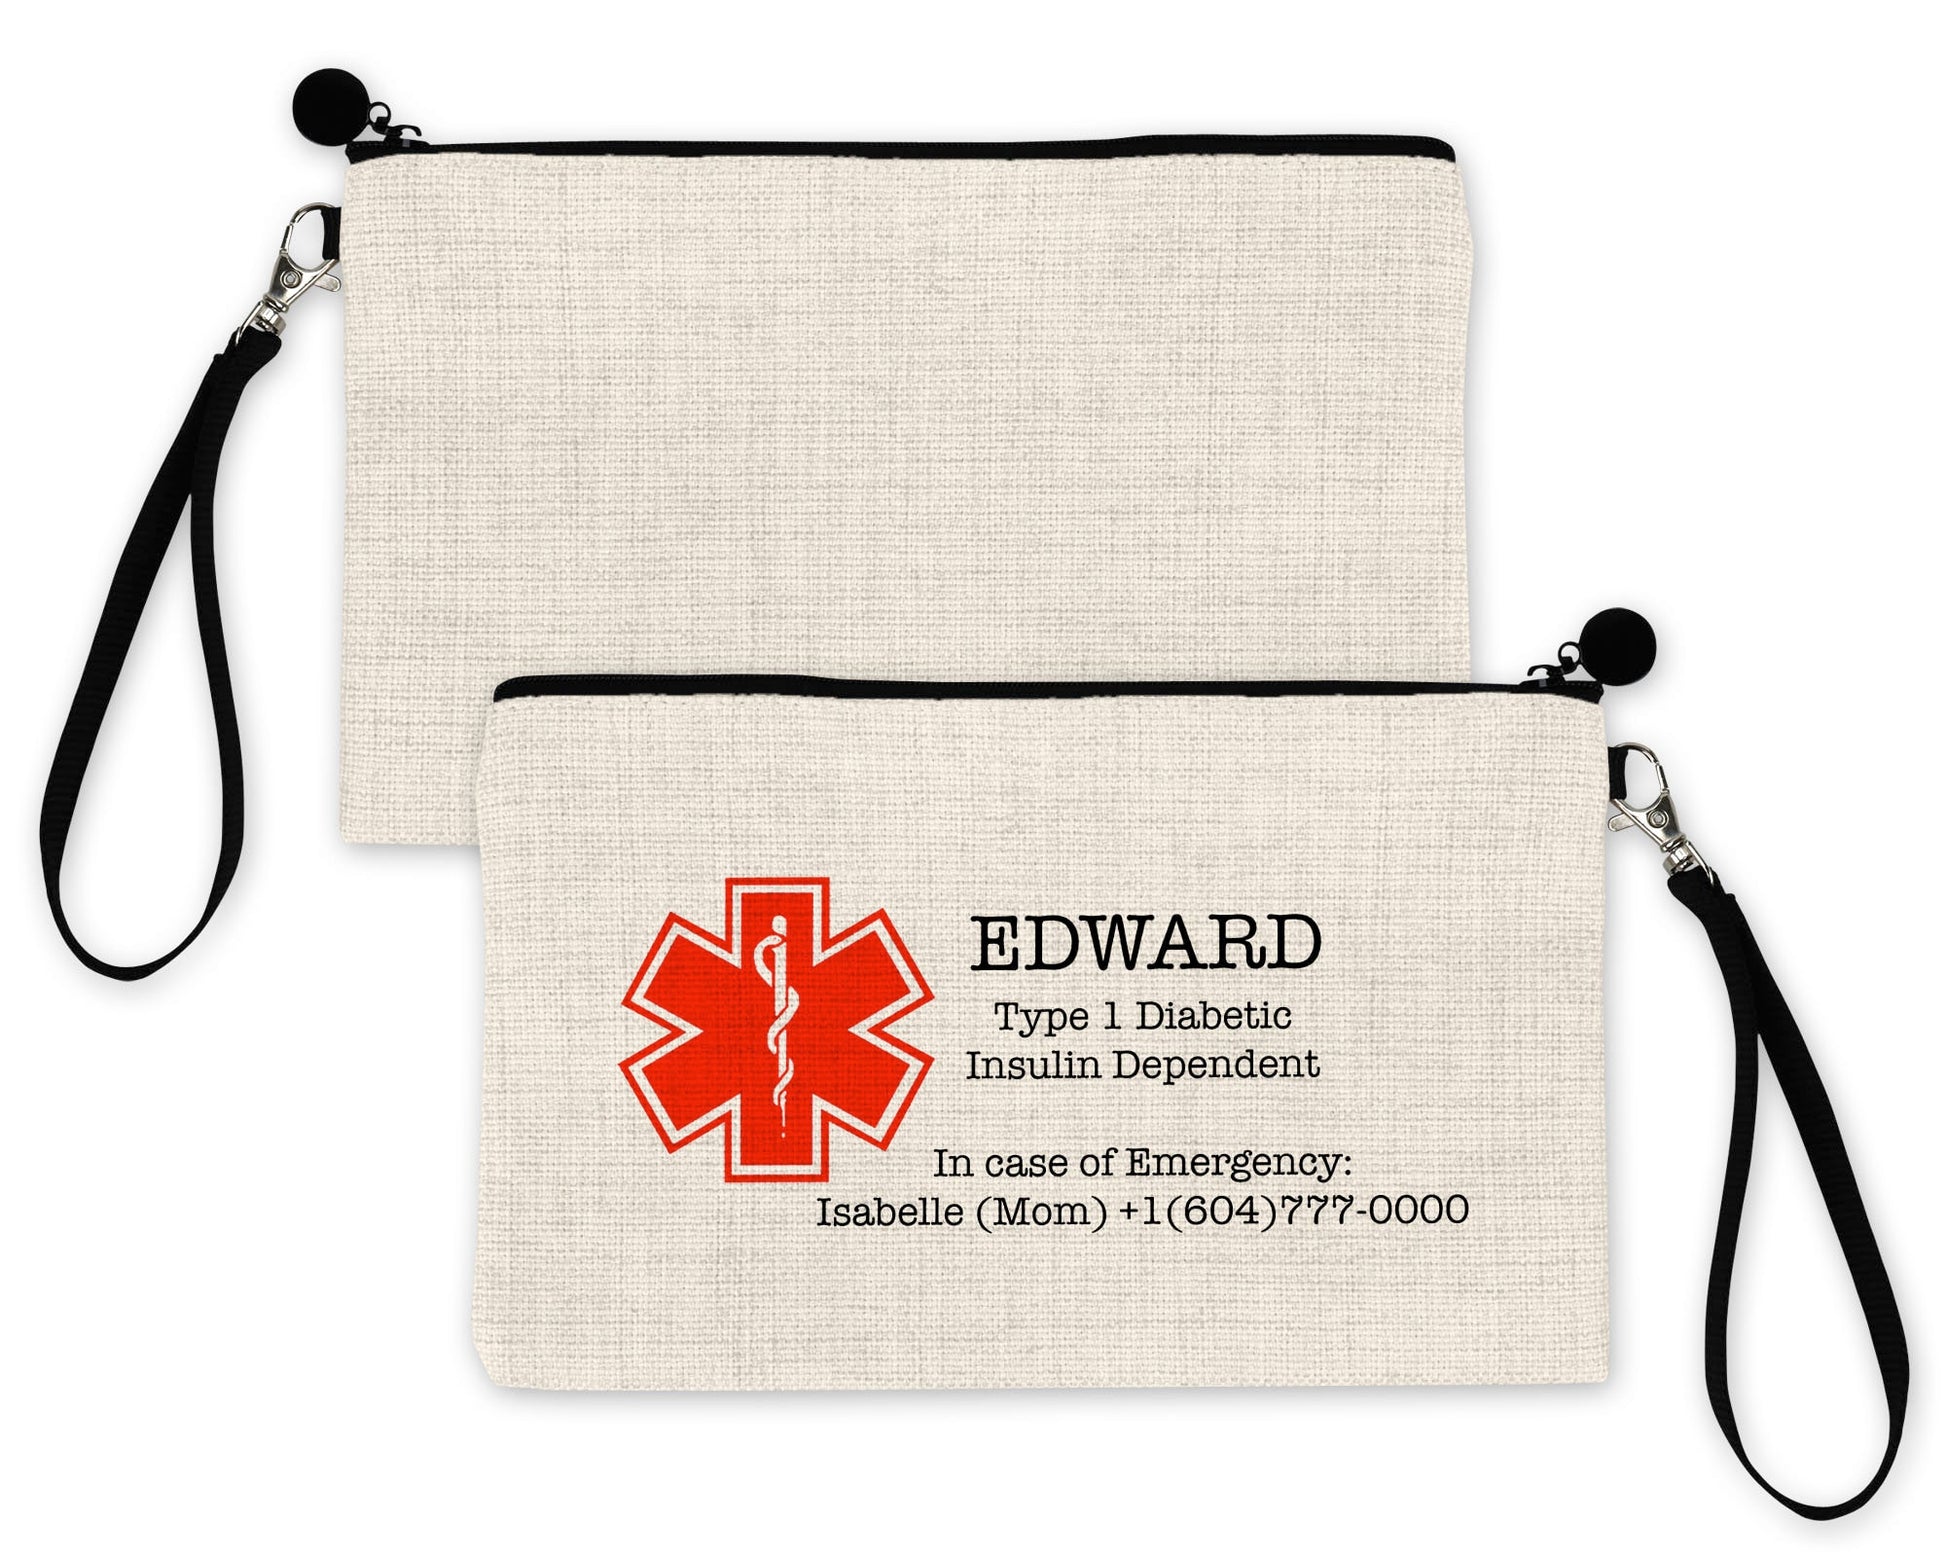 Custom Medical Alert Bundle Pouch and Pin for Epipen, First Aid Bag and Tag with Health Information Alert